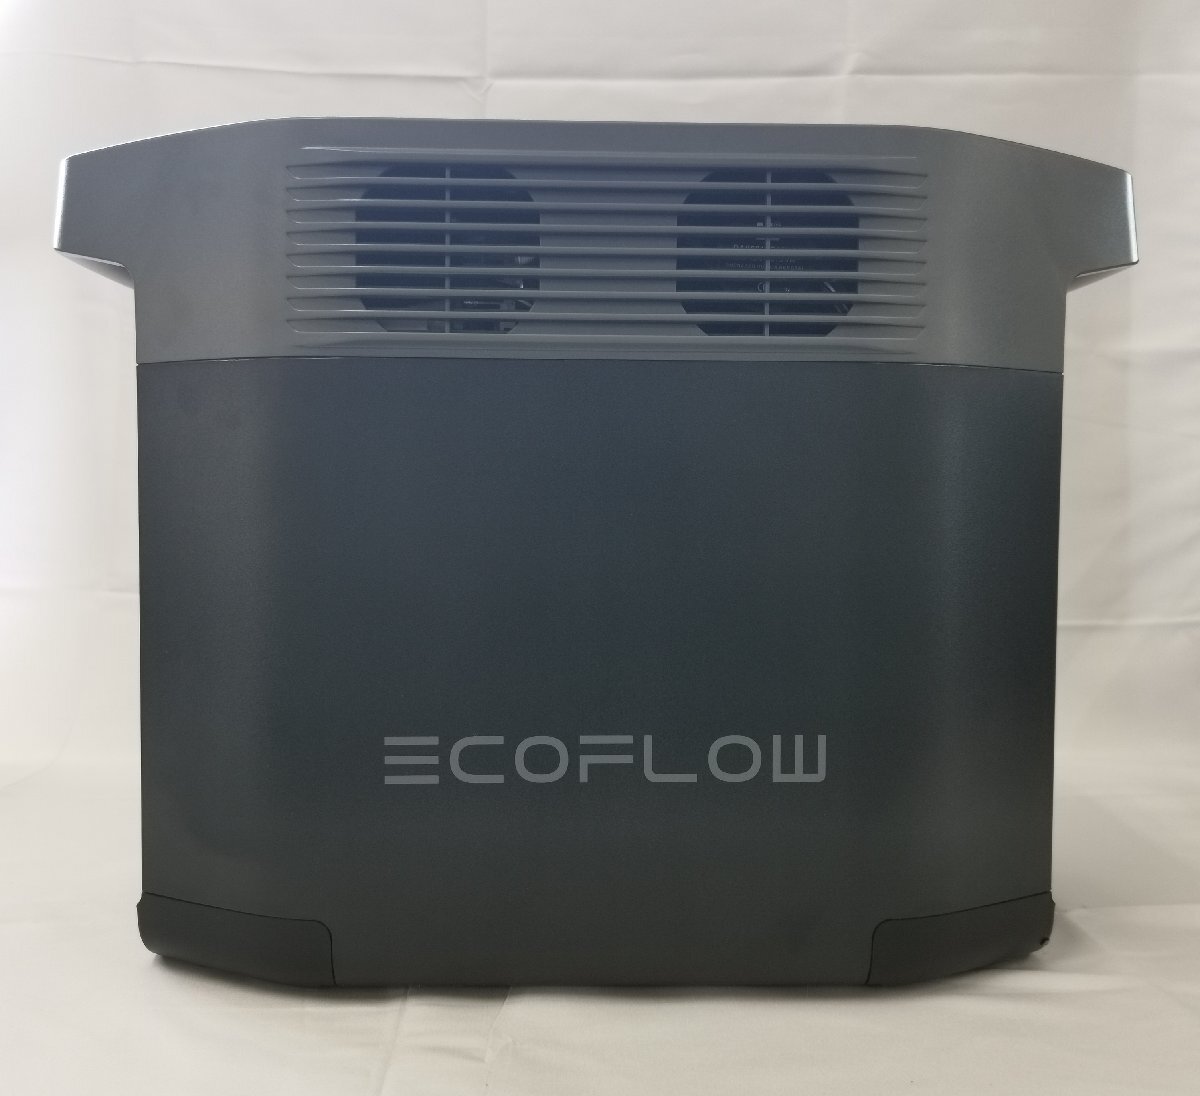  beautiful goods EcoFlow Manufacturers direct sale portable power supply DELTA 2 1024Wh with guarantee battery disaster prevention supplies sudden speed charge camp sleeping area in the vehicle eko flow 